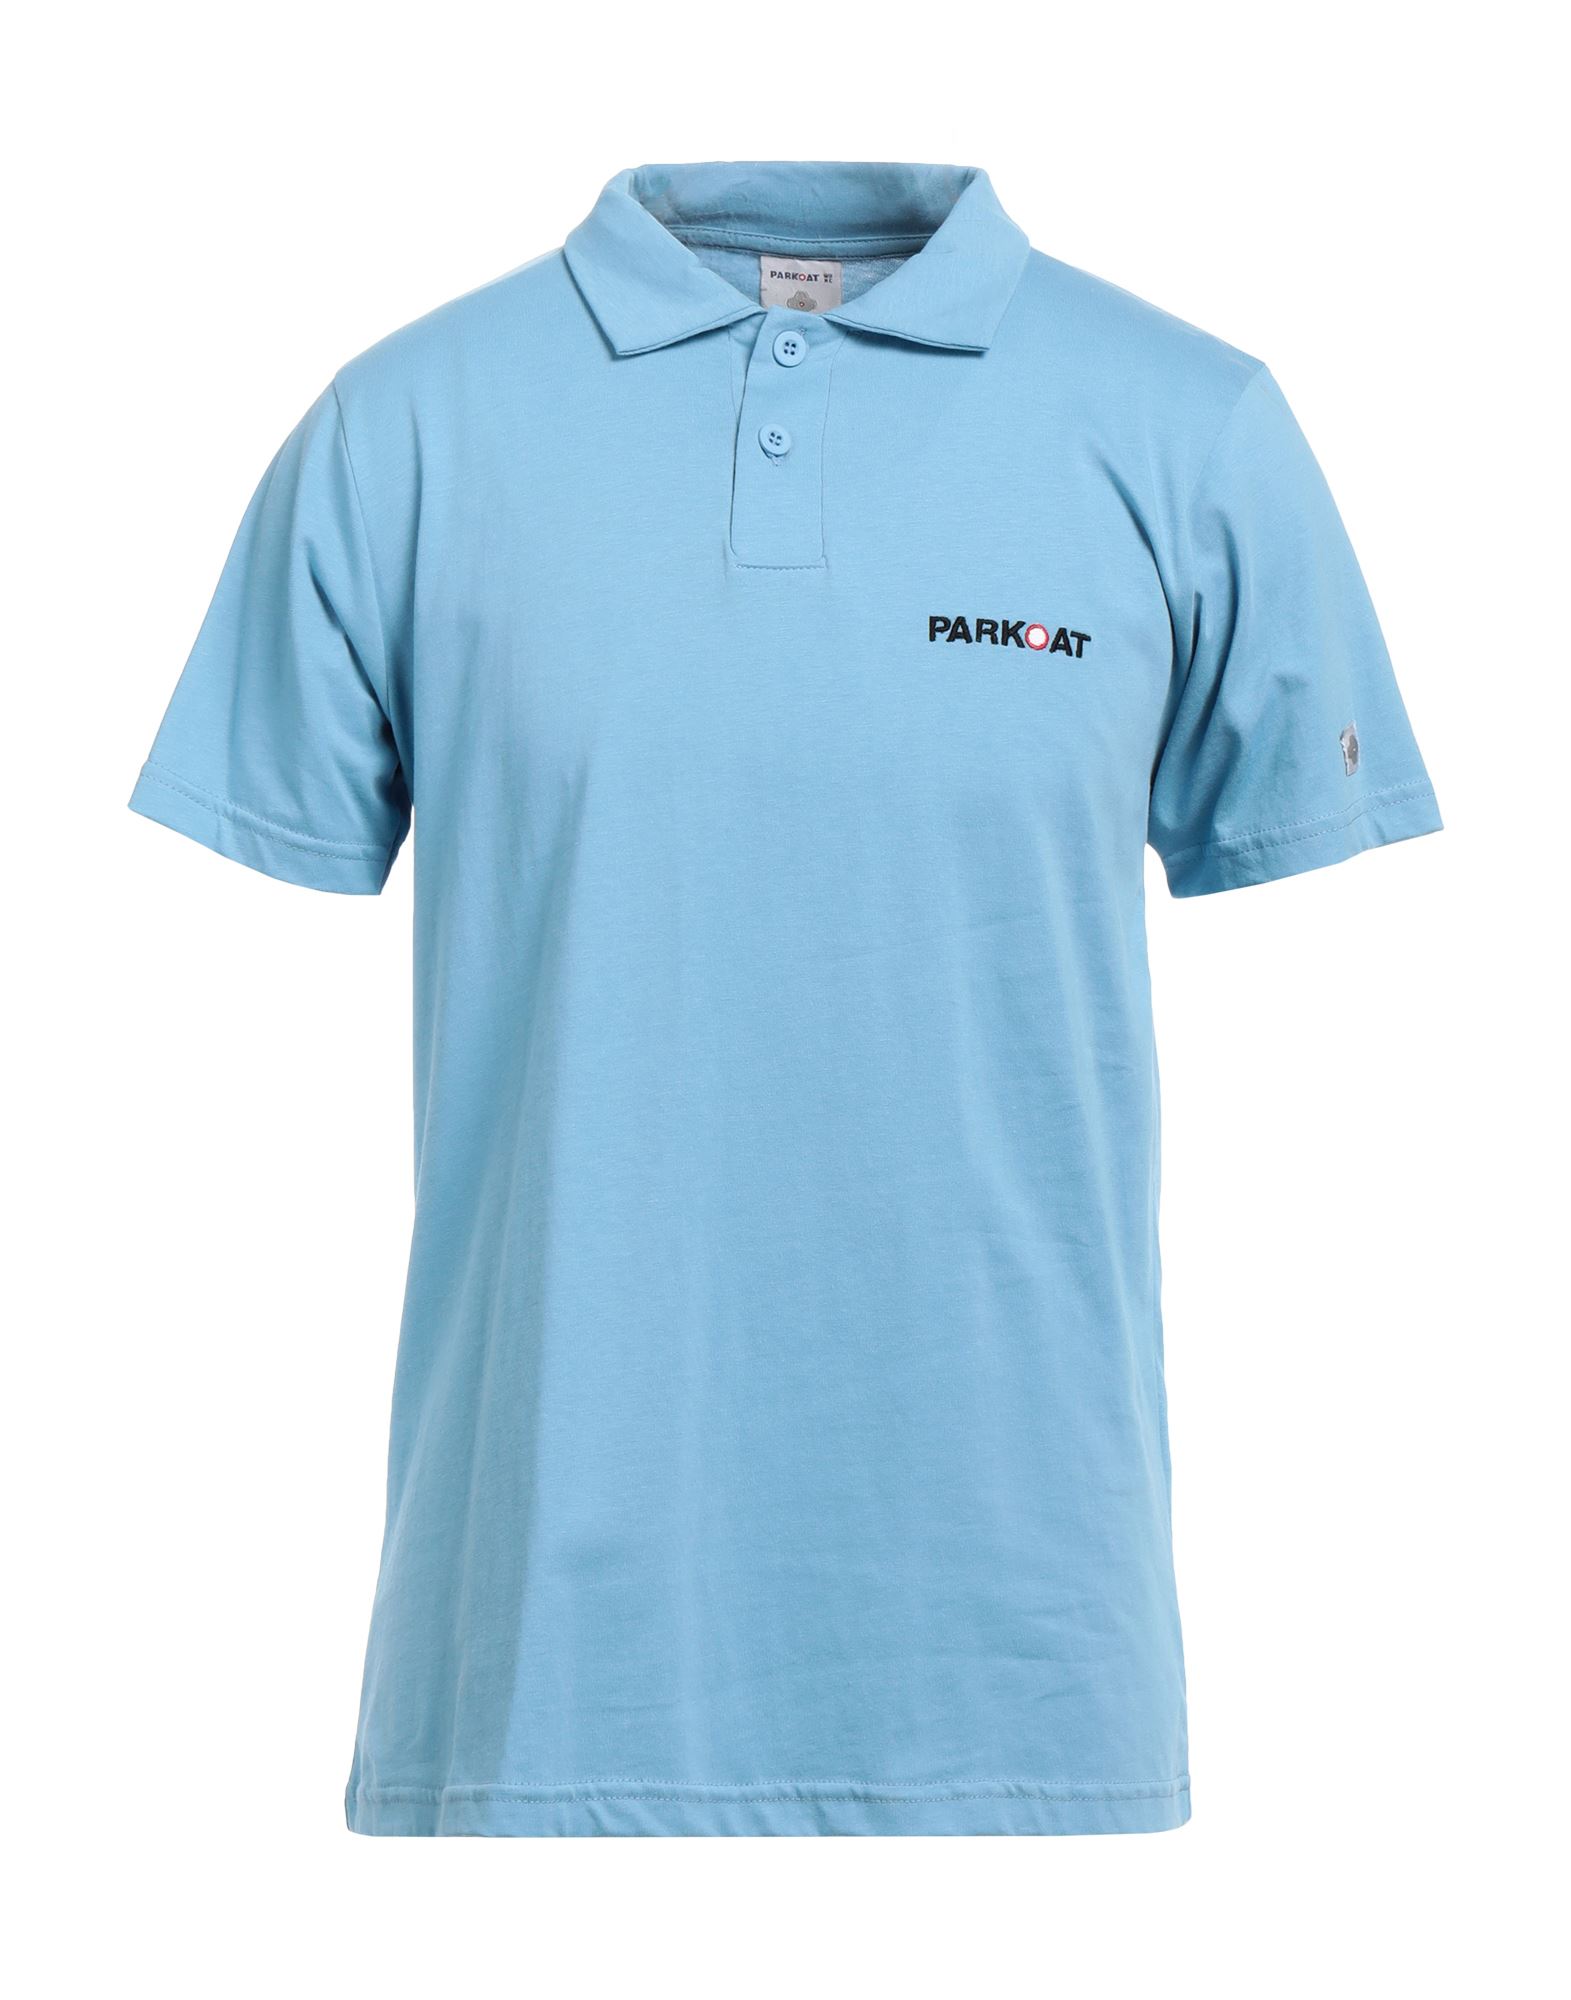 Parkoat Polo Shirts In Blue